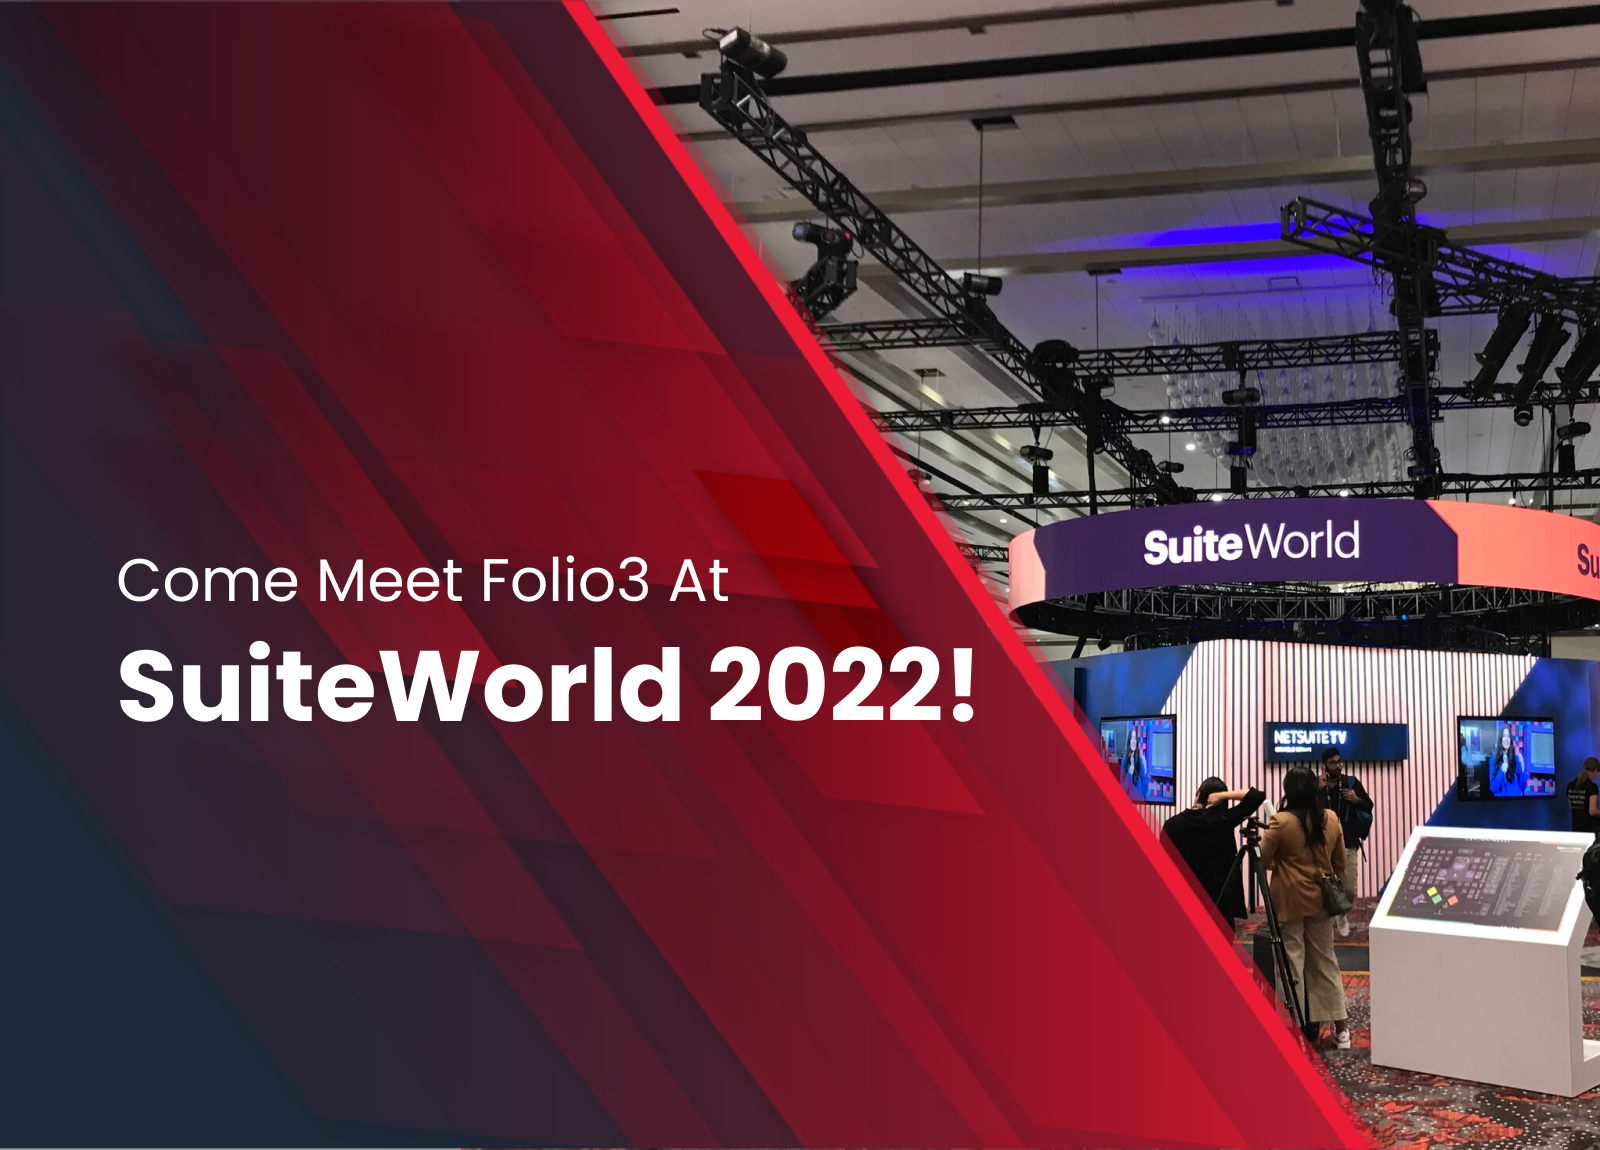 SuiteWorld 2022 Starts Today. Come Meet us!